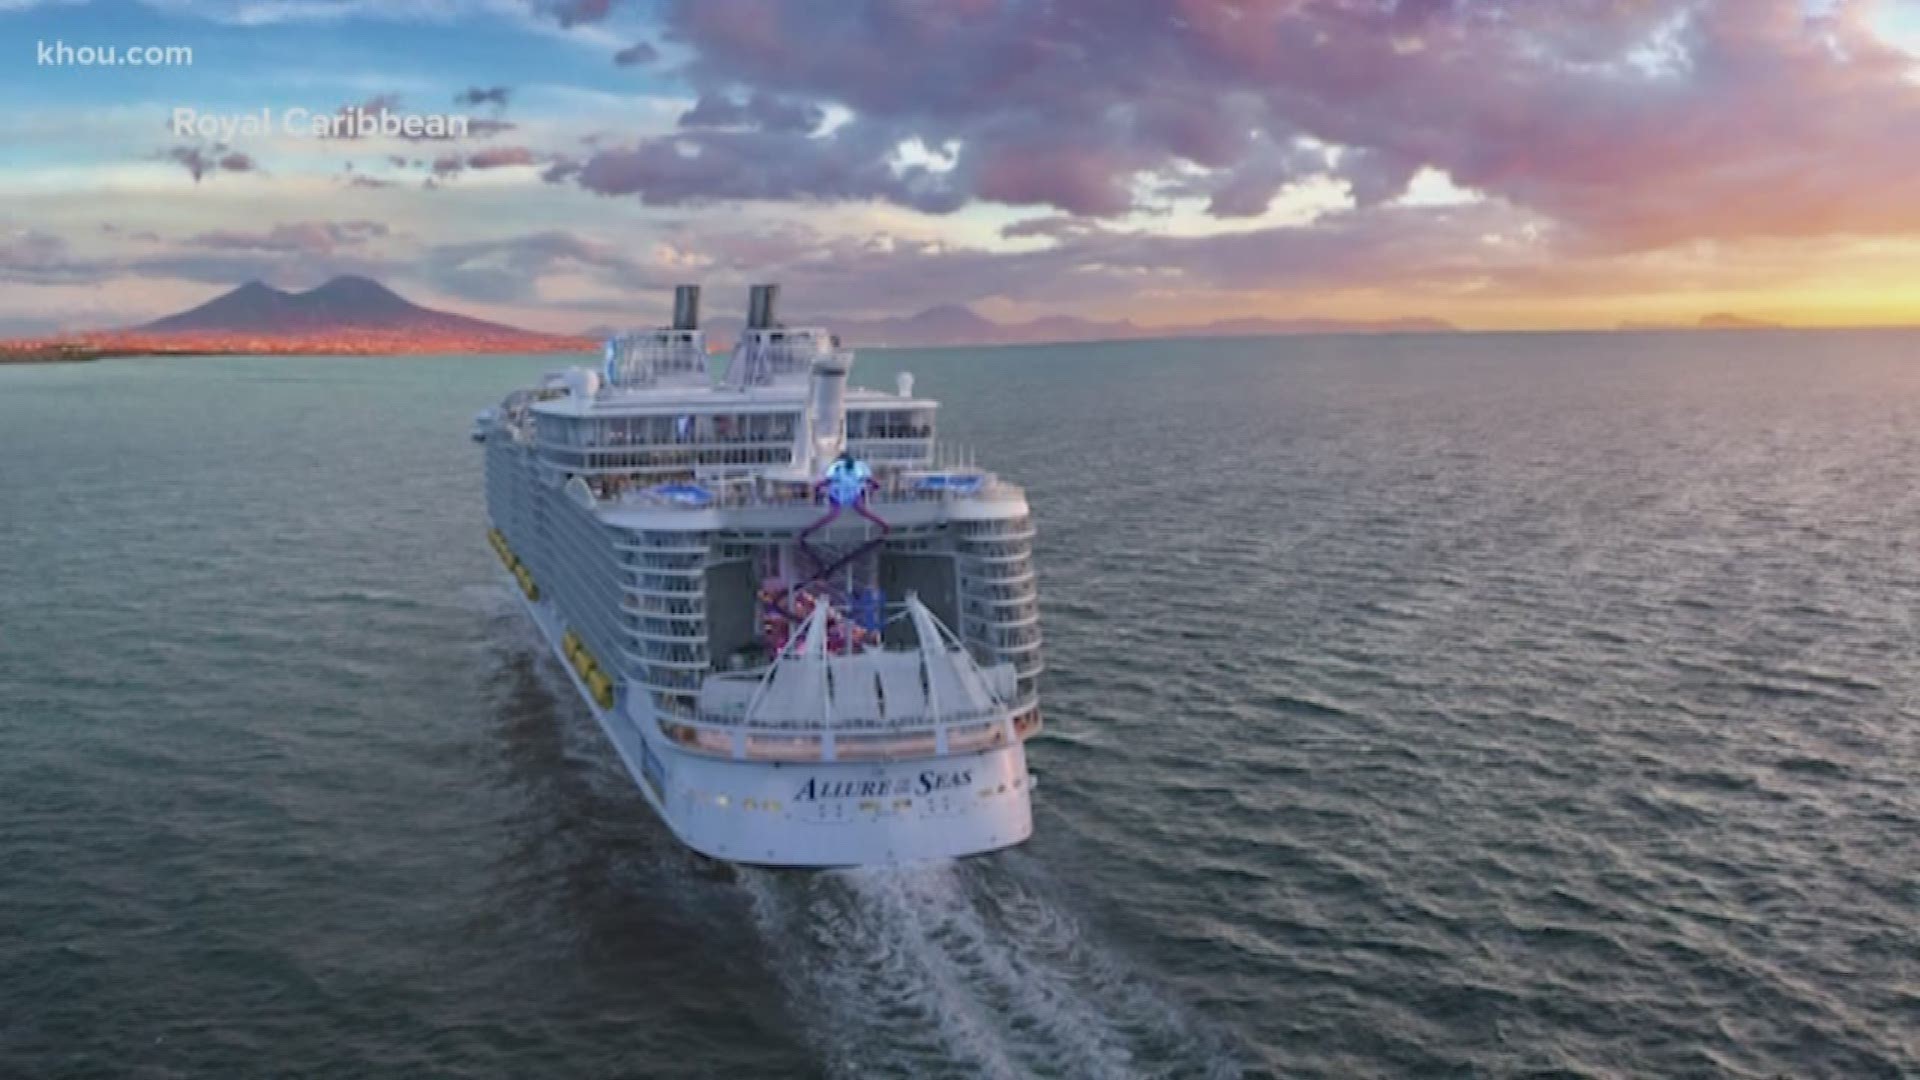 A massive cruise ship is coming to Galveston. Royal Caribbean confirms its newly-renovated Allure of the Seas will begin sailing out of Galveston in 2021.